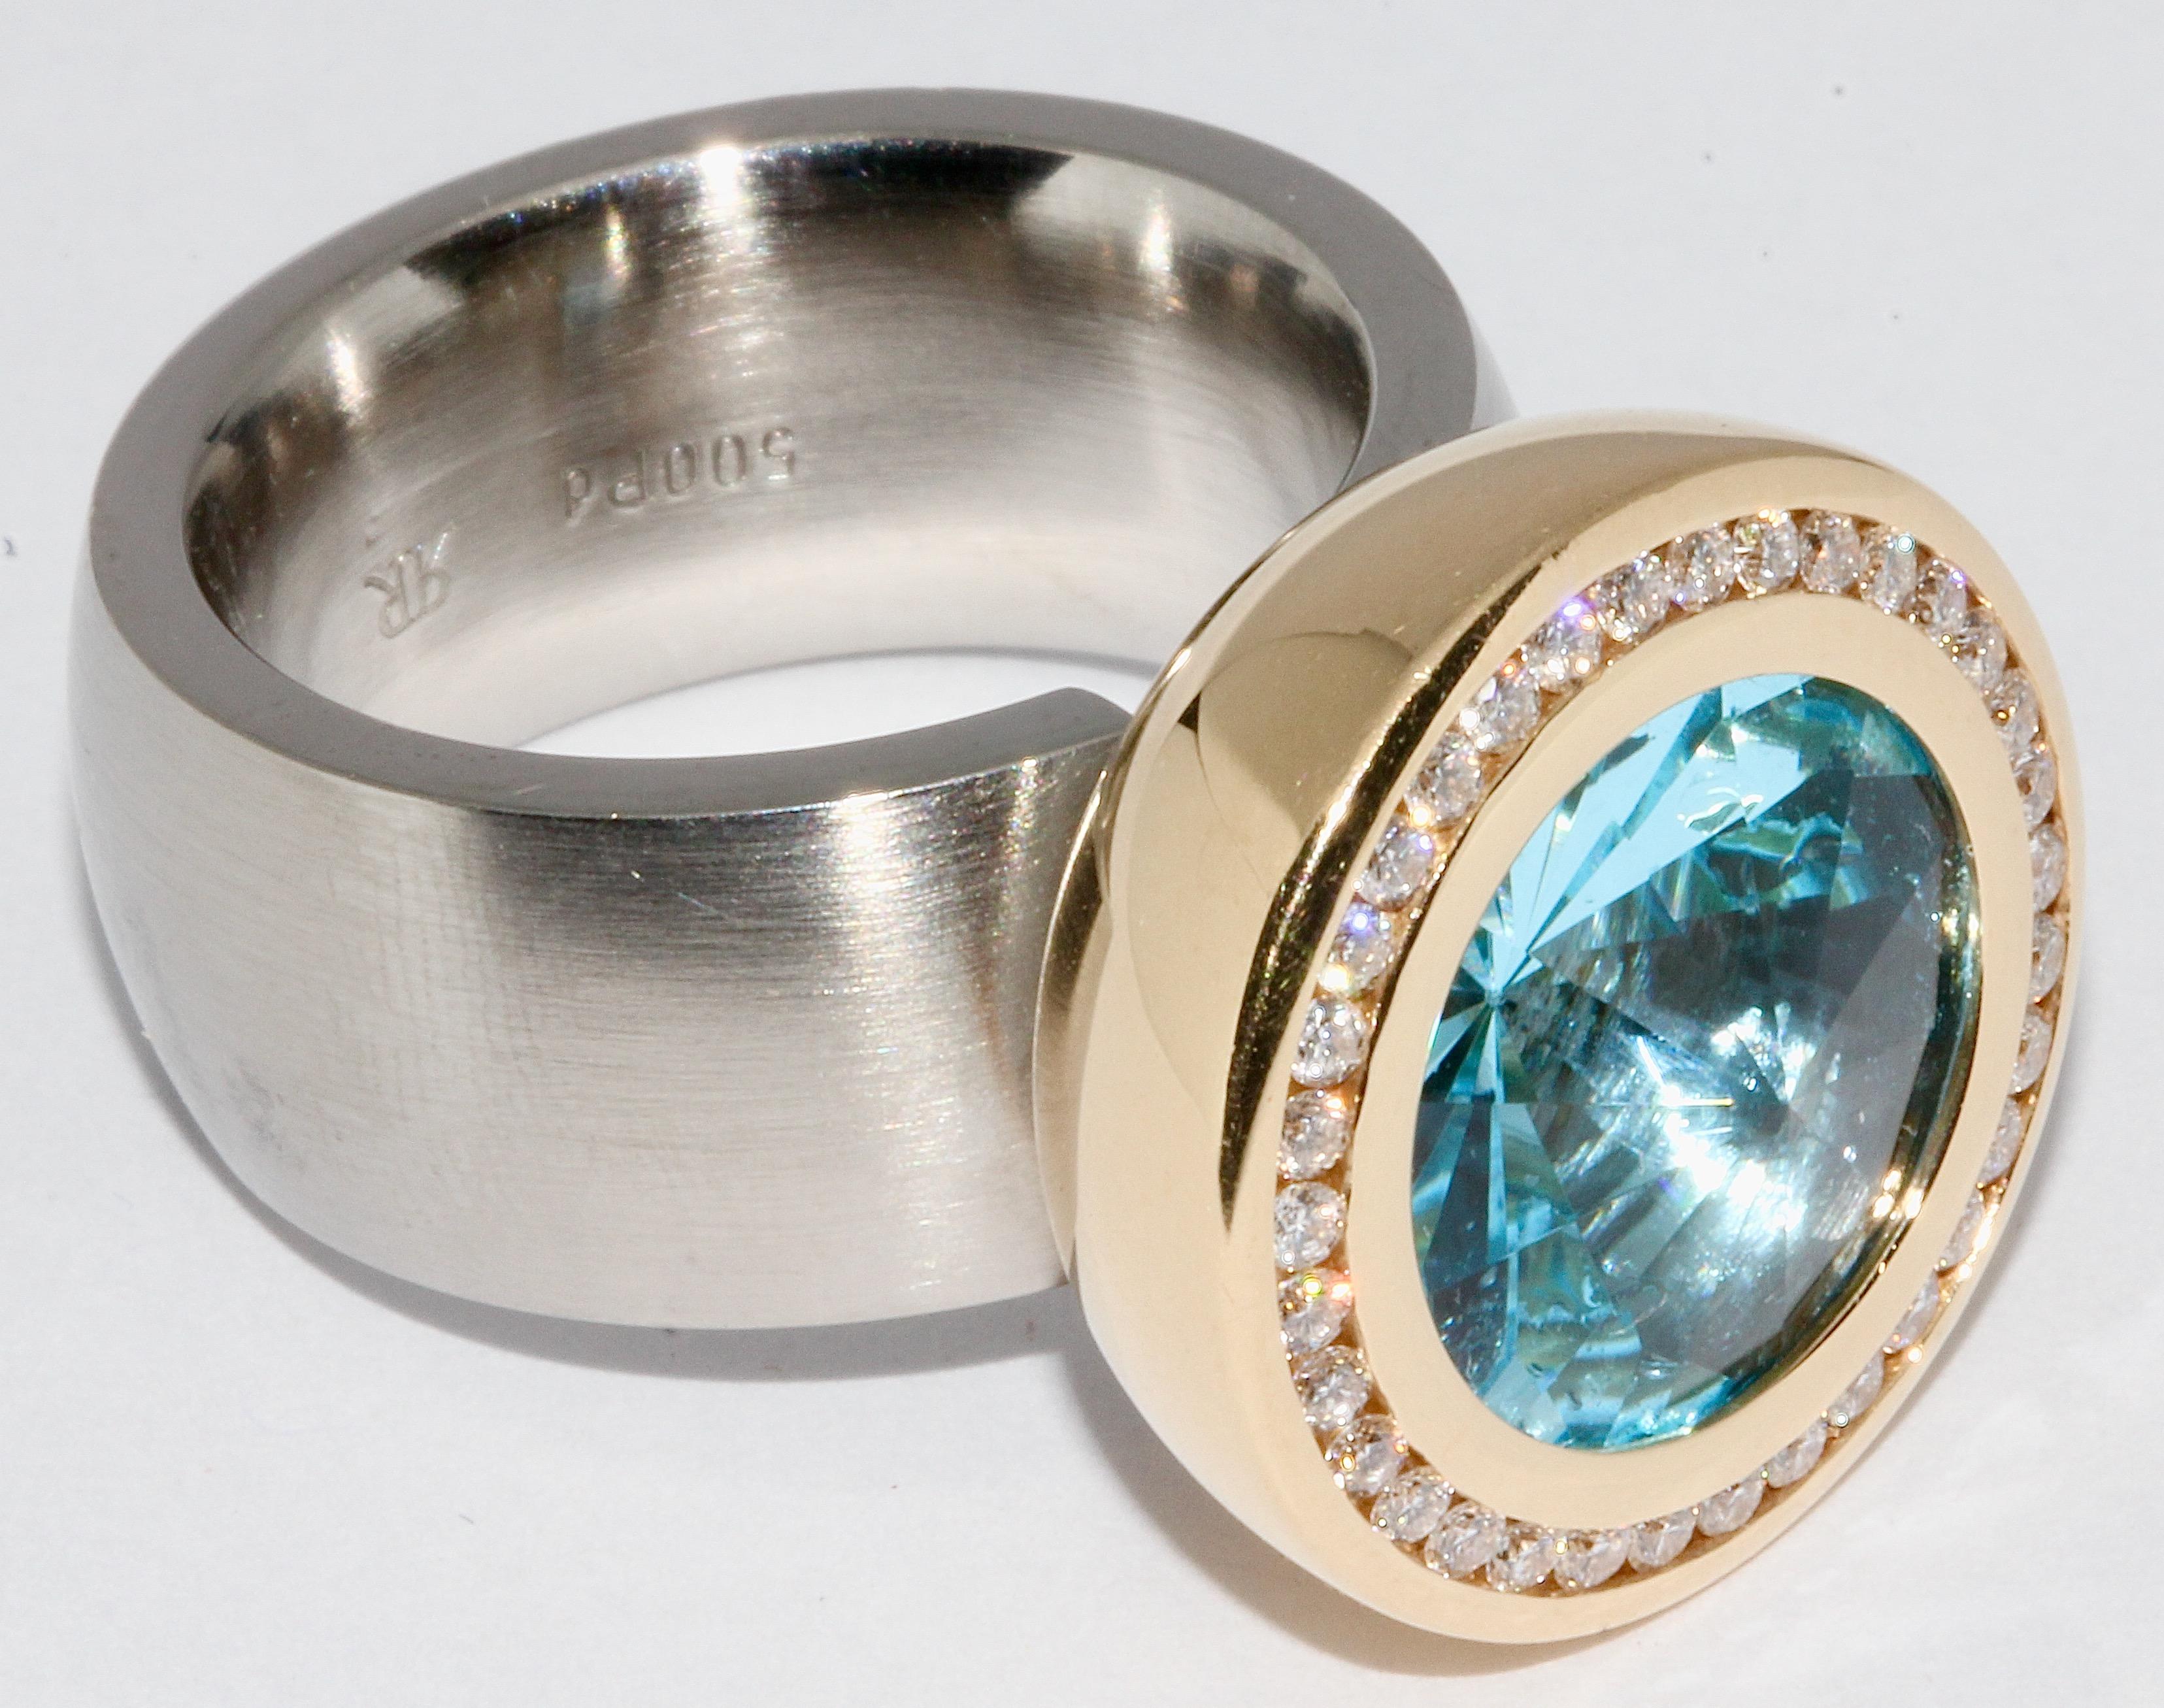 Palladium with 18K Gold Designer Ring by ROHRBACHER. Aquamarine and Diamonds.

Exclusive and high quality designer ring from the traditional manufacturer Rohrbacher.
The ring is heavy, solid and made of palladium and 18K yellow gold.
The ring is set